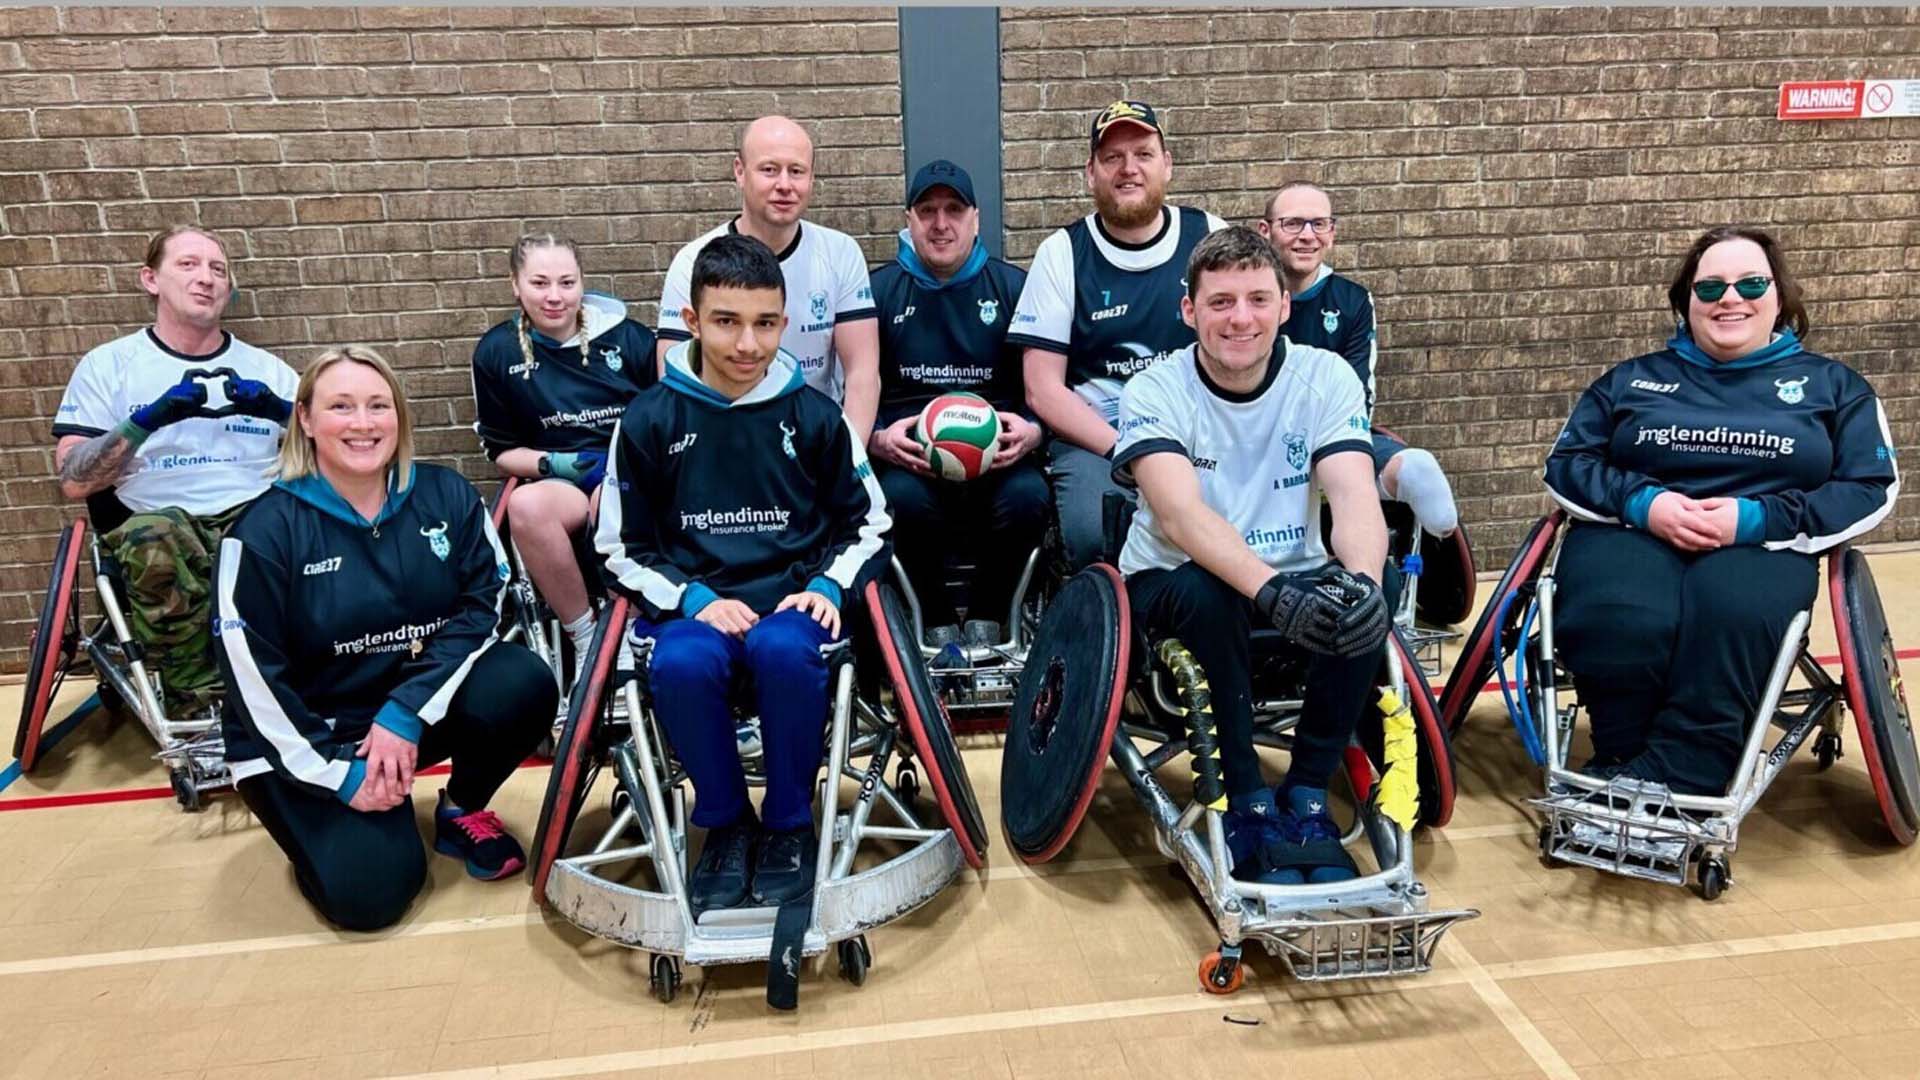 Group image of the North East Barbarians Wheelchair Rugby team, wearing sponsored kit